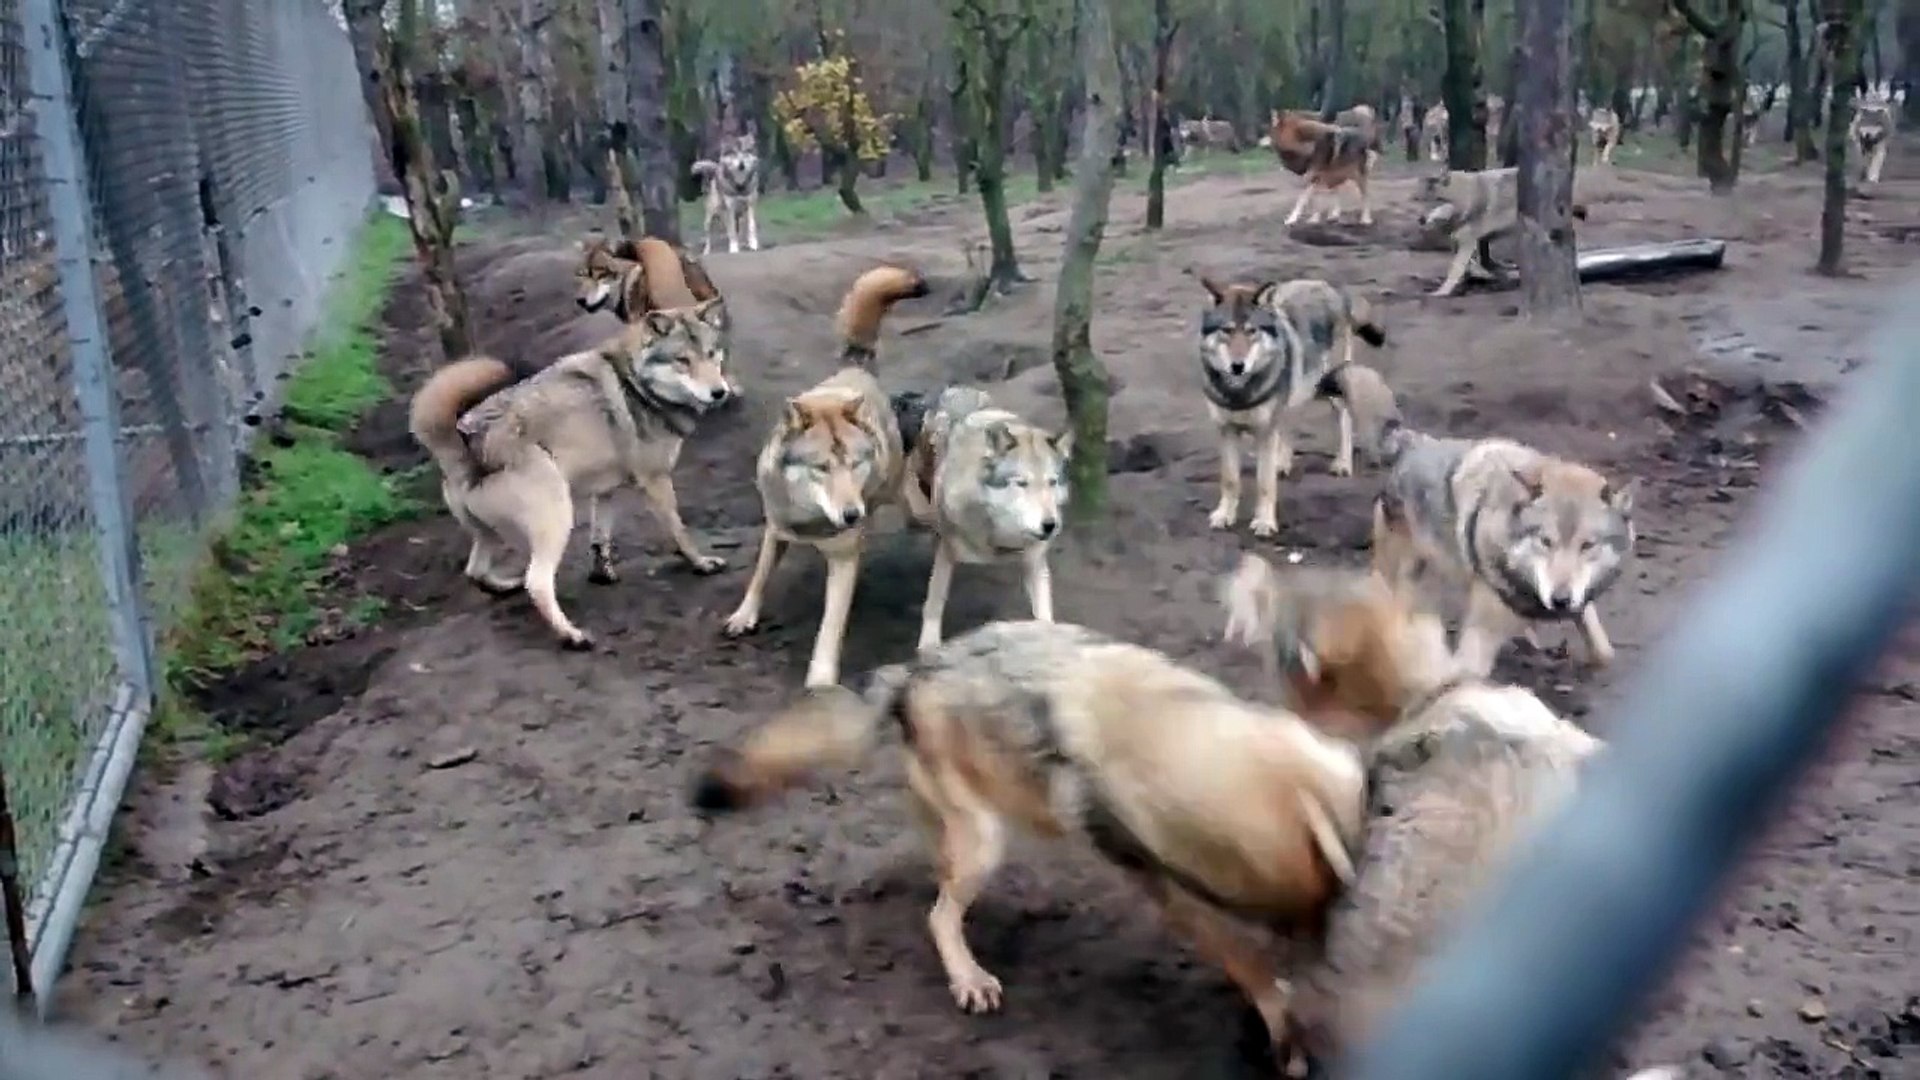 Wolf Pack attacks Omega Wolf in Park - Vidéo Dailymotion